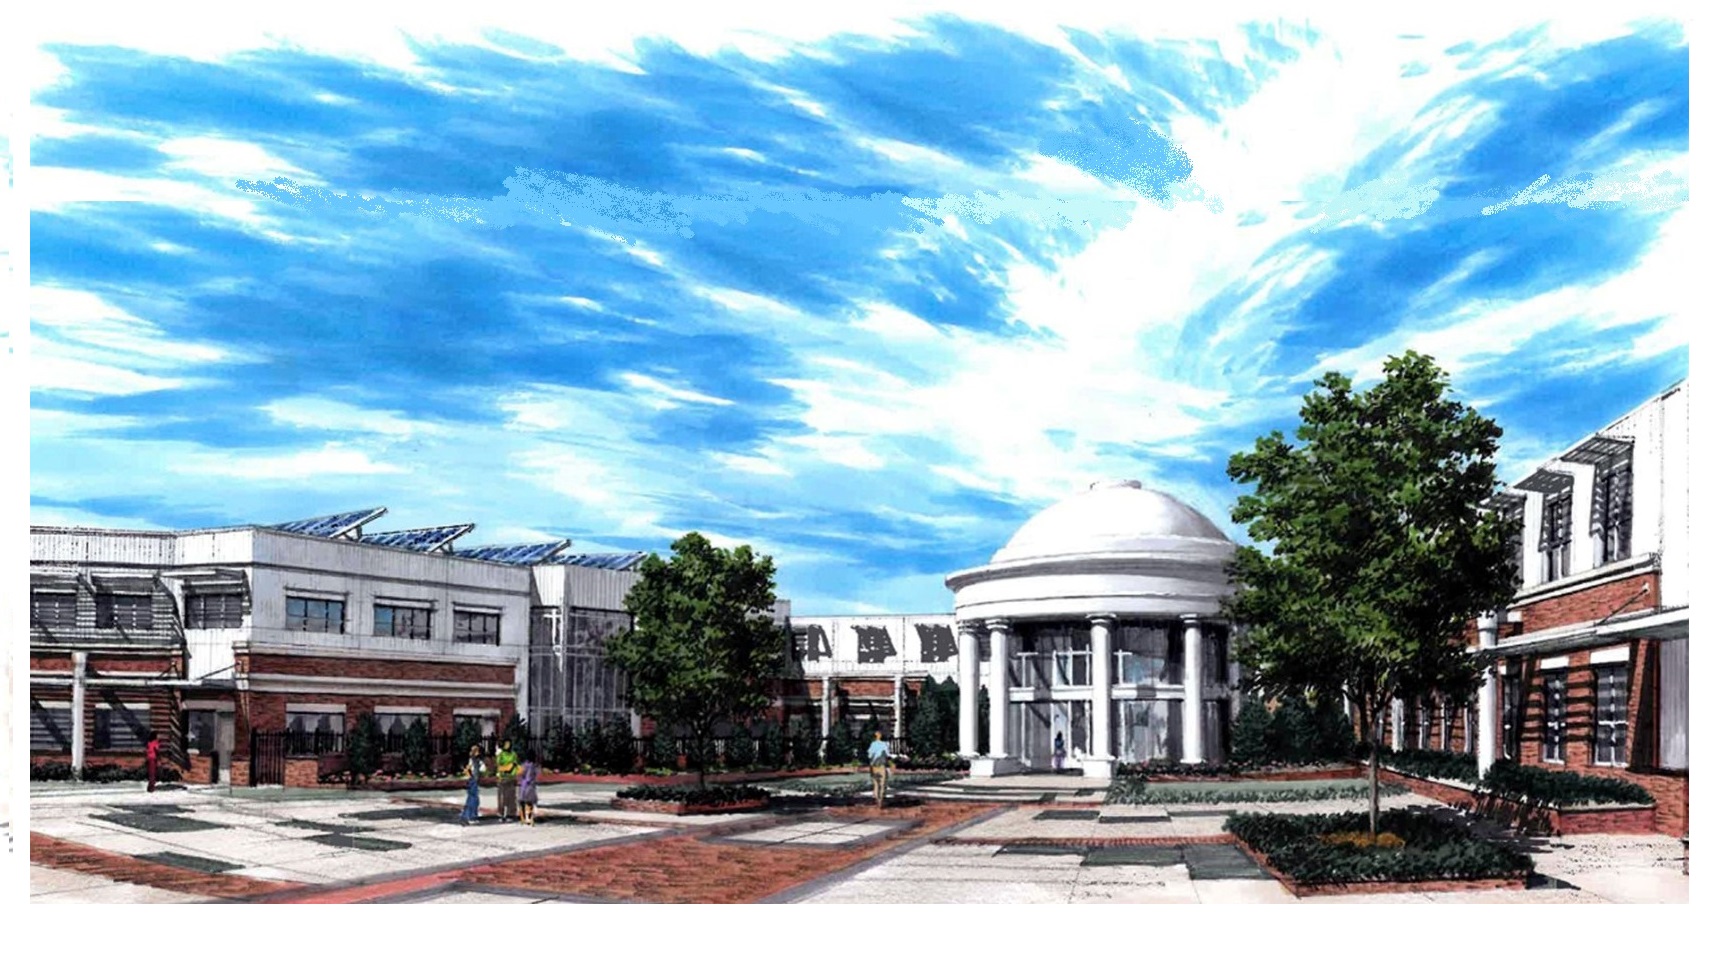 Architectural drawing of TJ during its design phase, which called for a large,
pedestrianized plaza flanking the front of the school. This was later revised as designs changed.